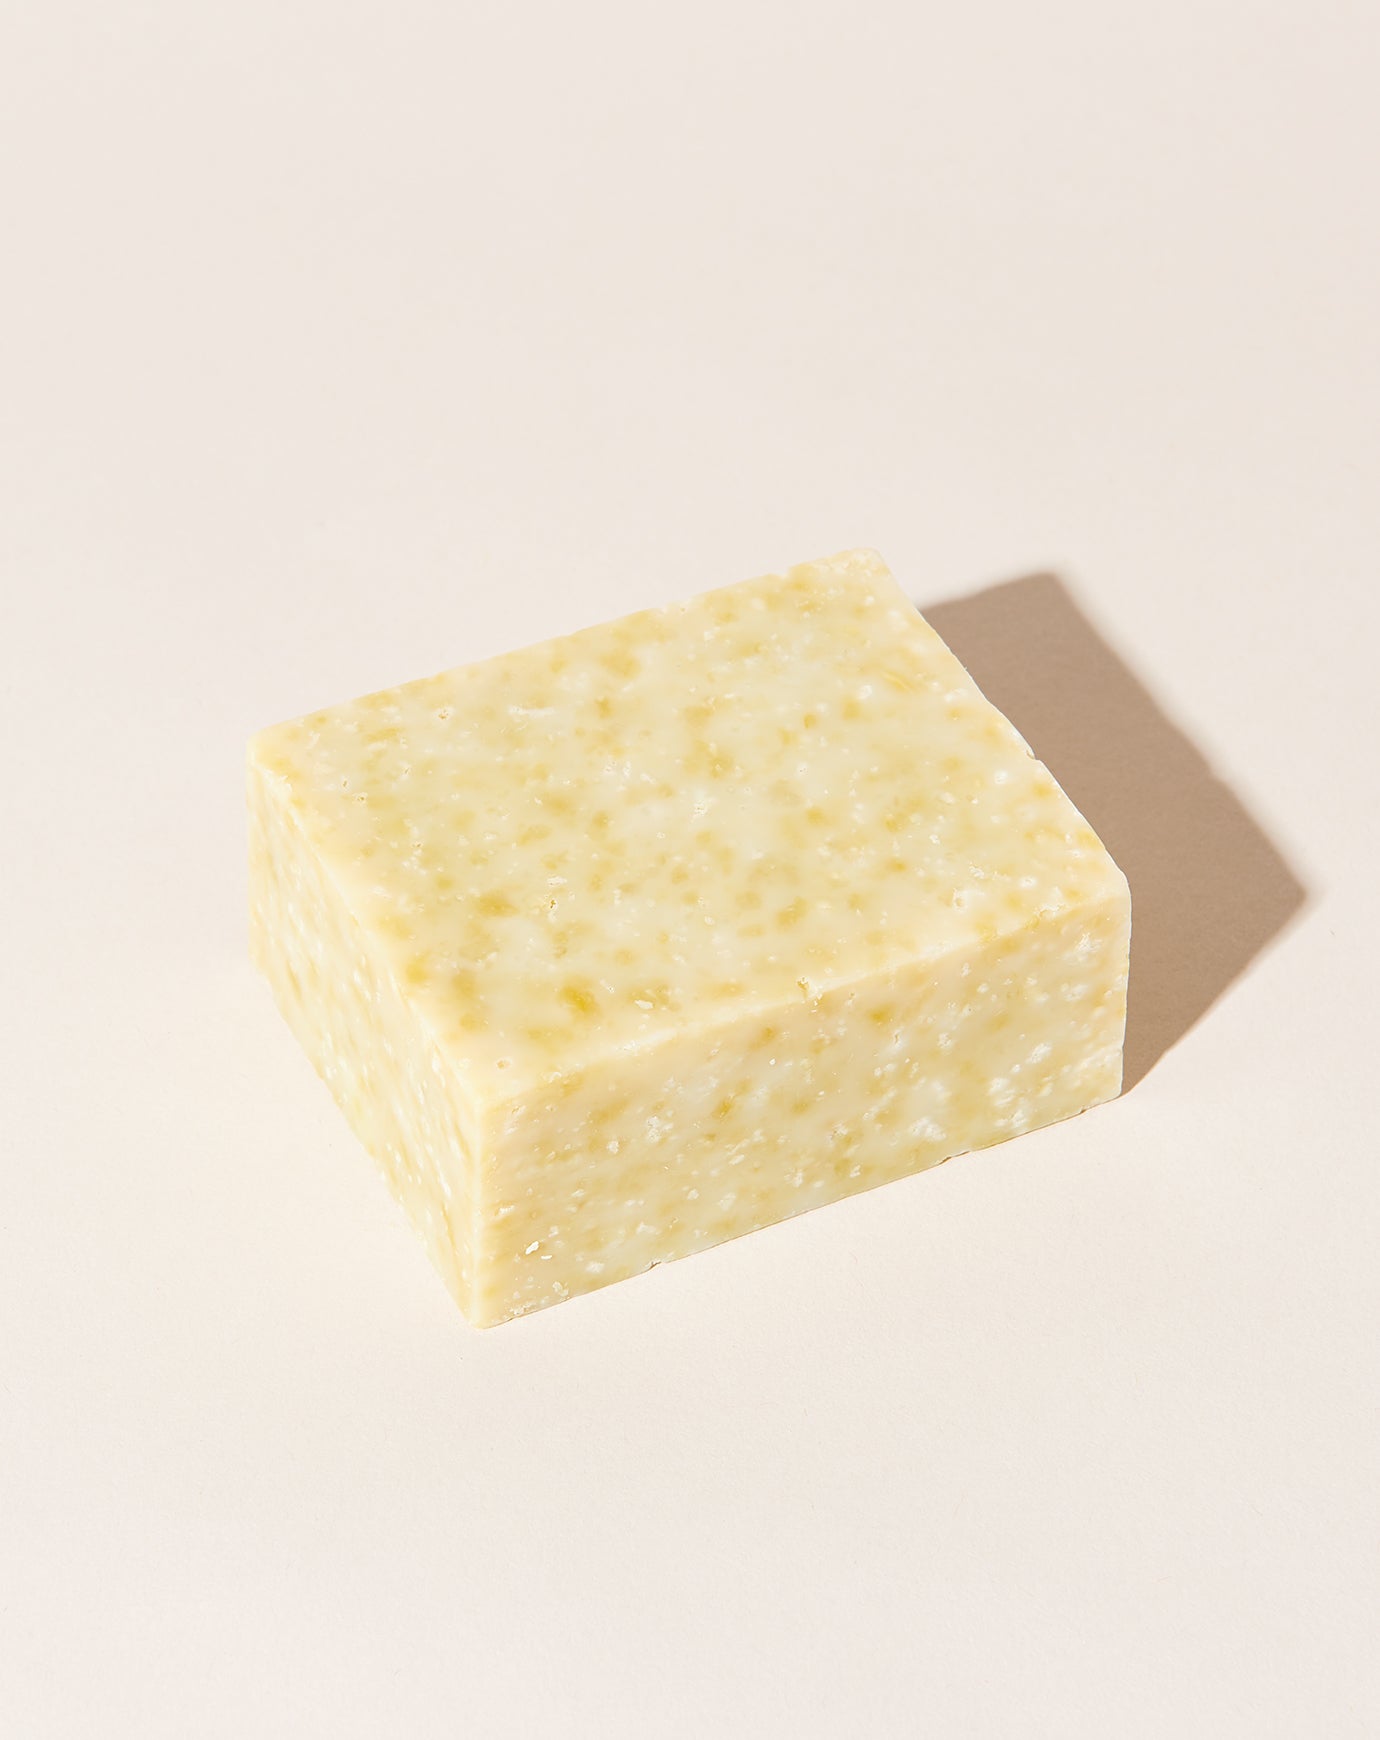 Saipua Soap in Saltwater